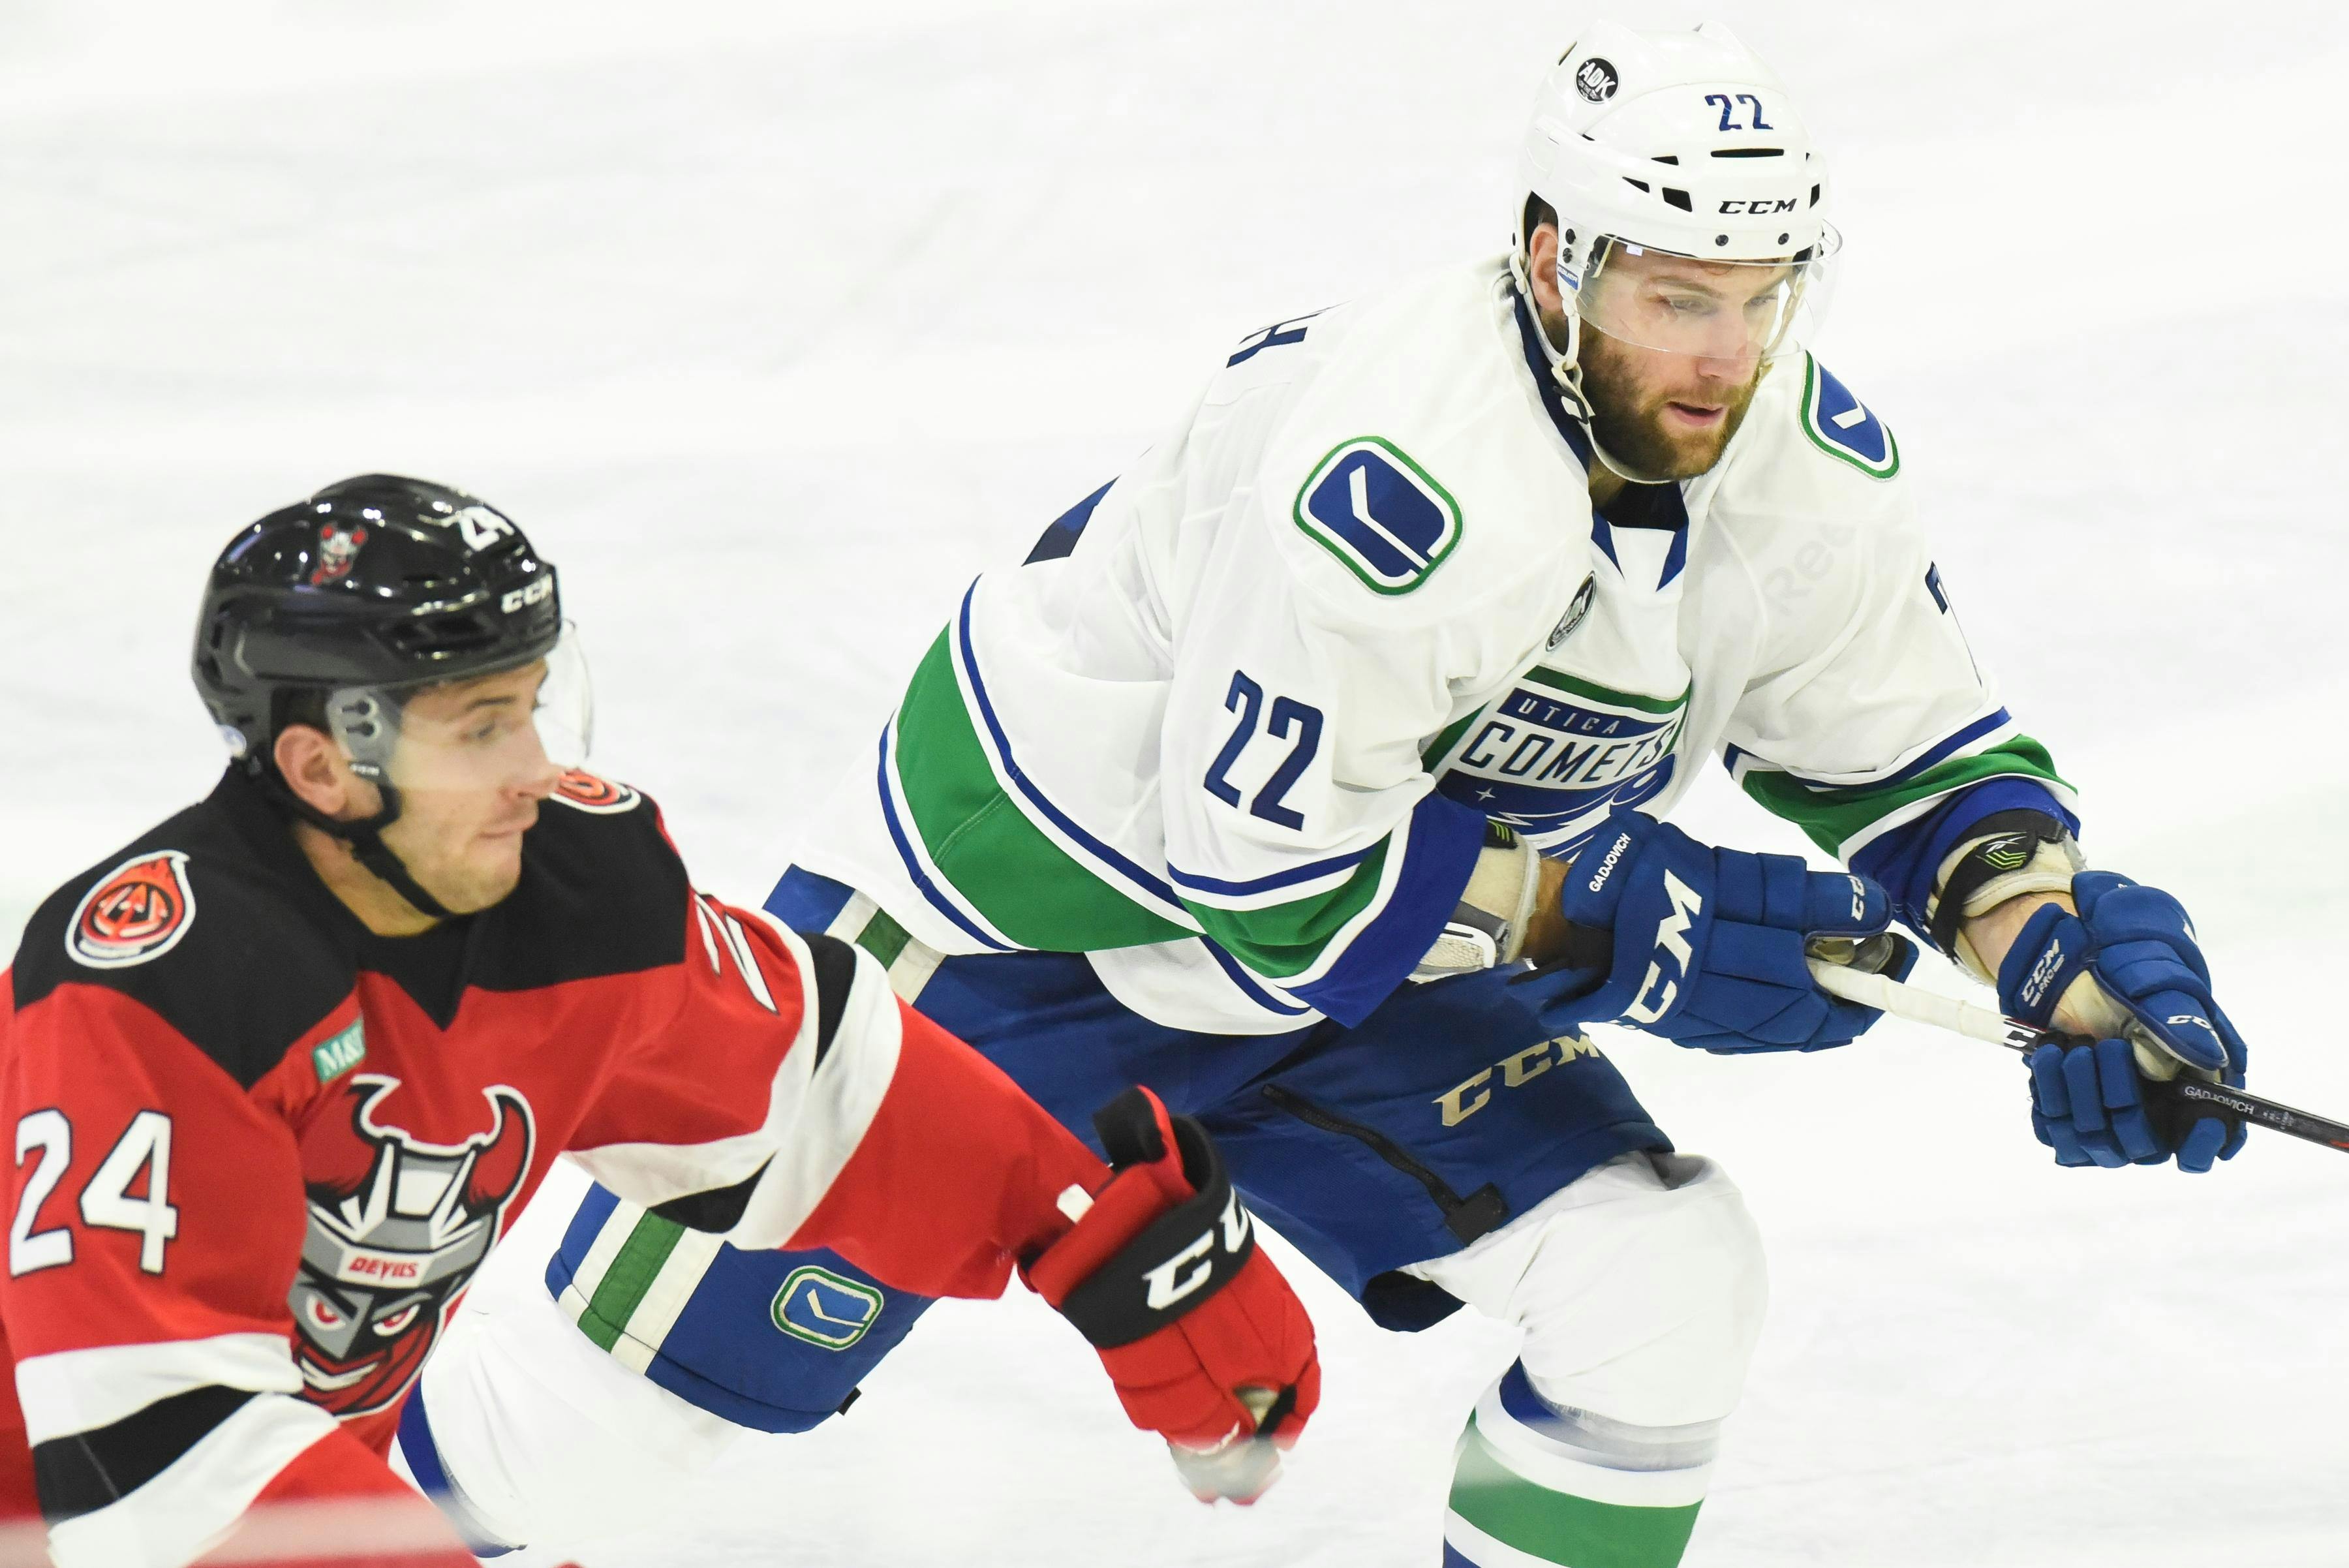 Vancouver Canucks announces Comets to be pulled from Utica